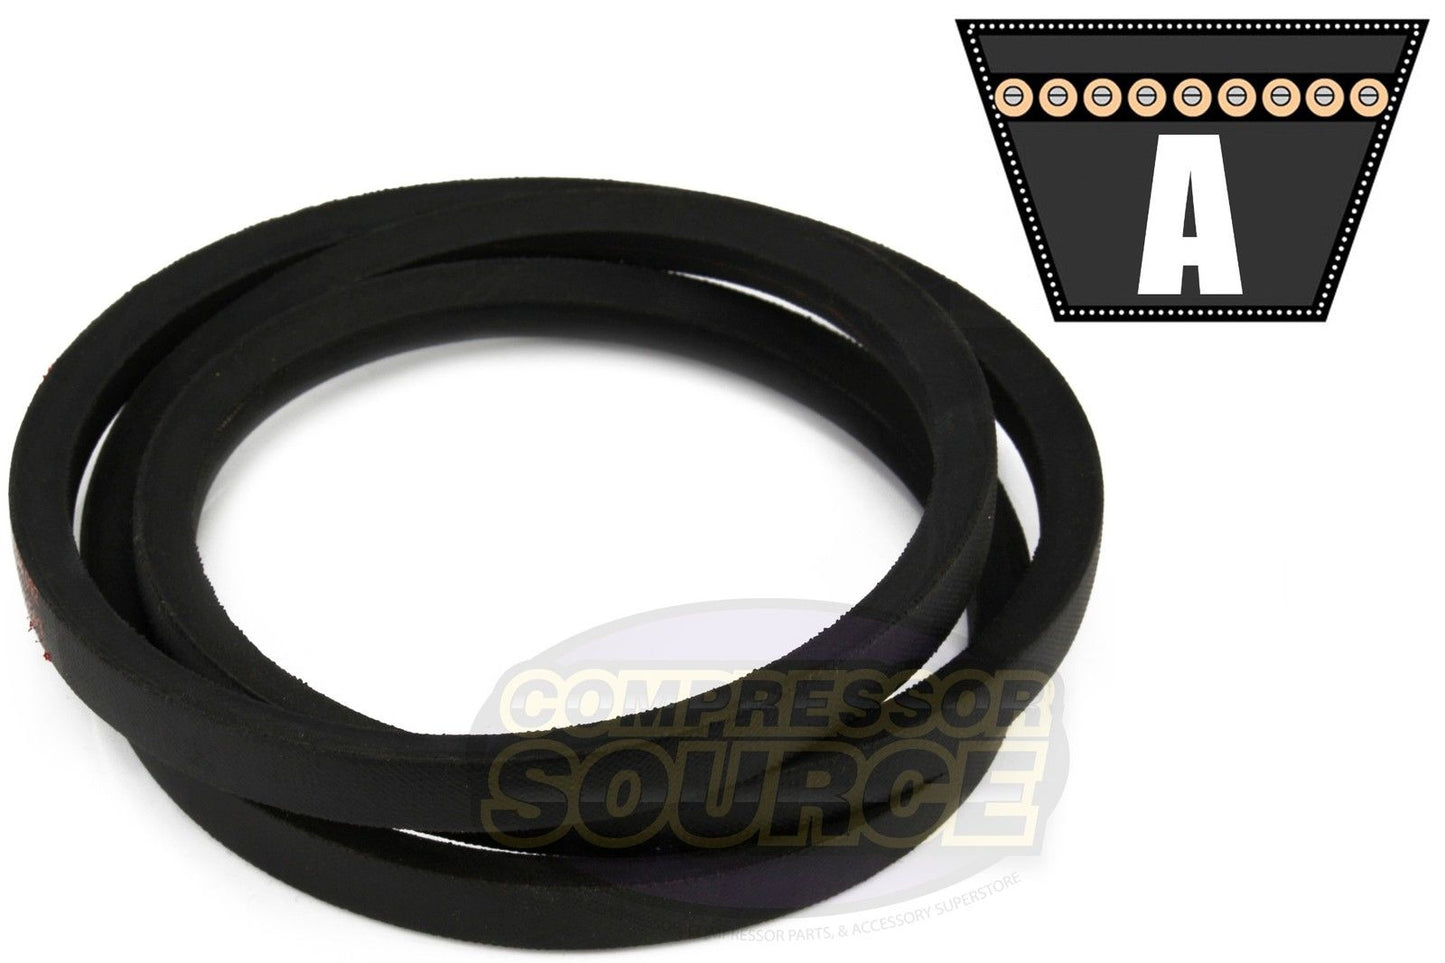 A49 Industrial & Lawn Mower 1/2" x 51" V Belt 4L510 Replacement High Quality